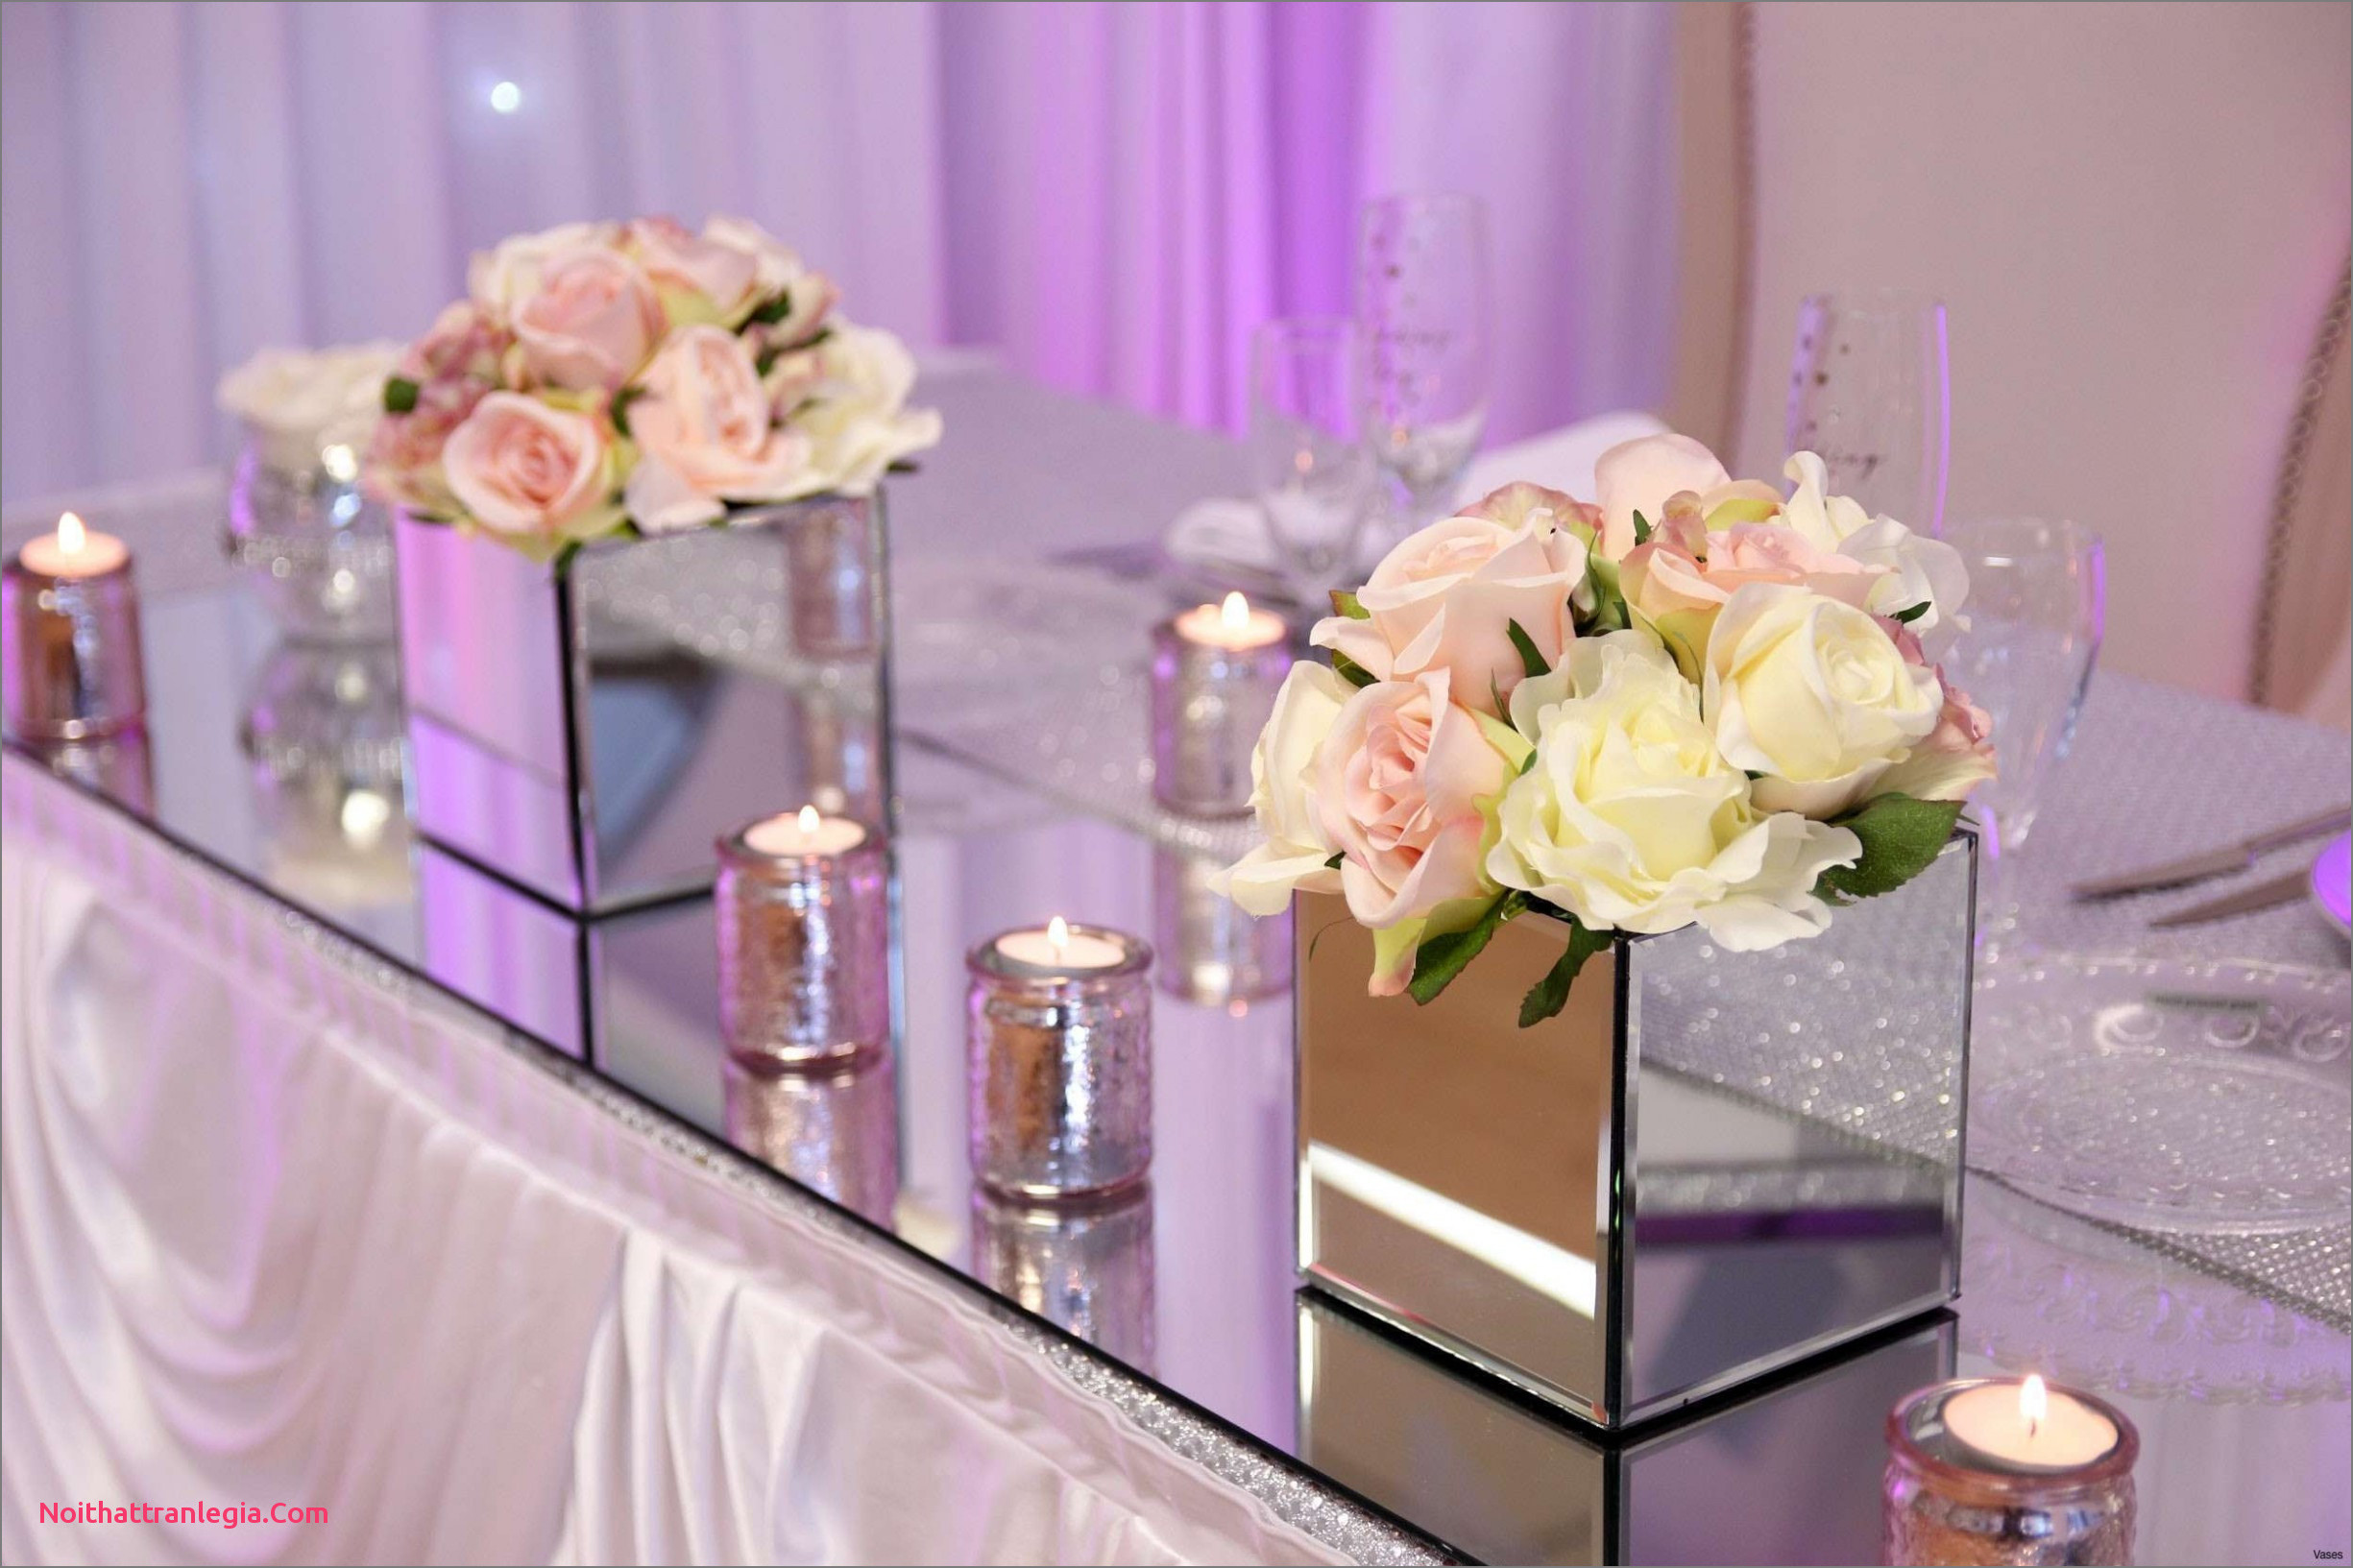 18 Famous Large Purple Floor Vase 2024 free download large purple floor vase of 20 wedding vases noithattranlegia vases design with mirrored square vase 3h vases mirror table decorationi 0d weddings